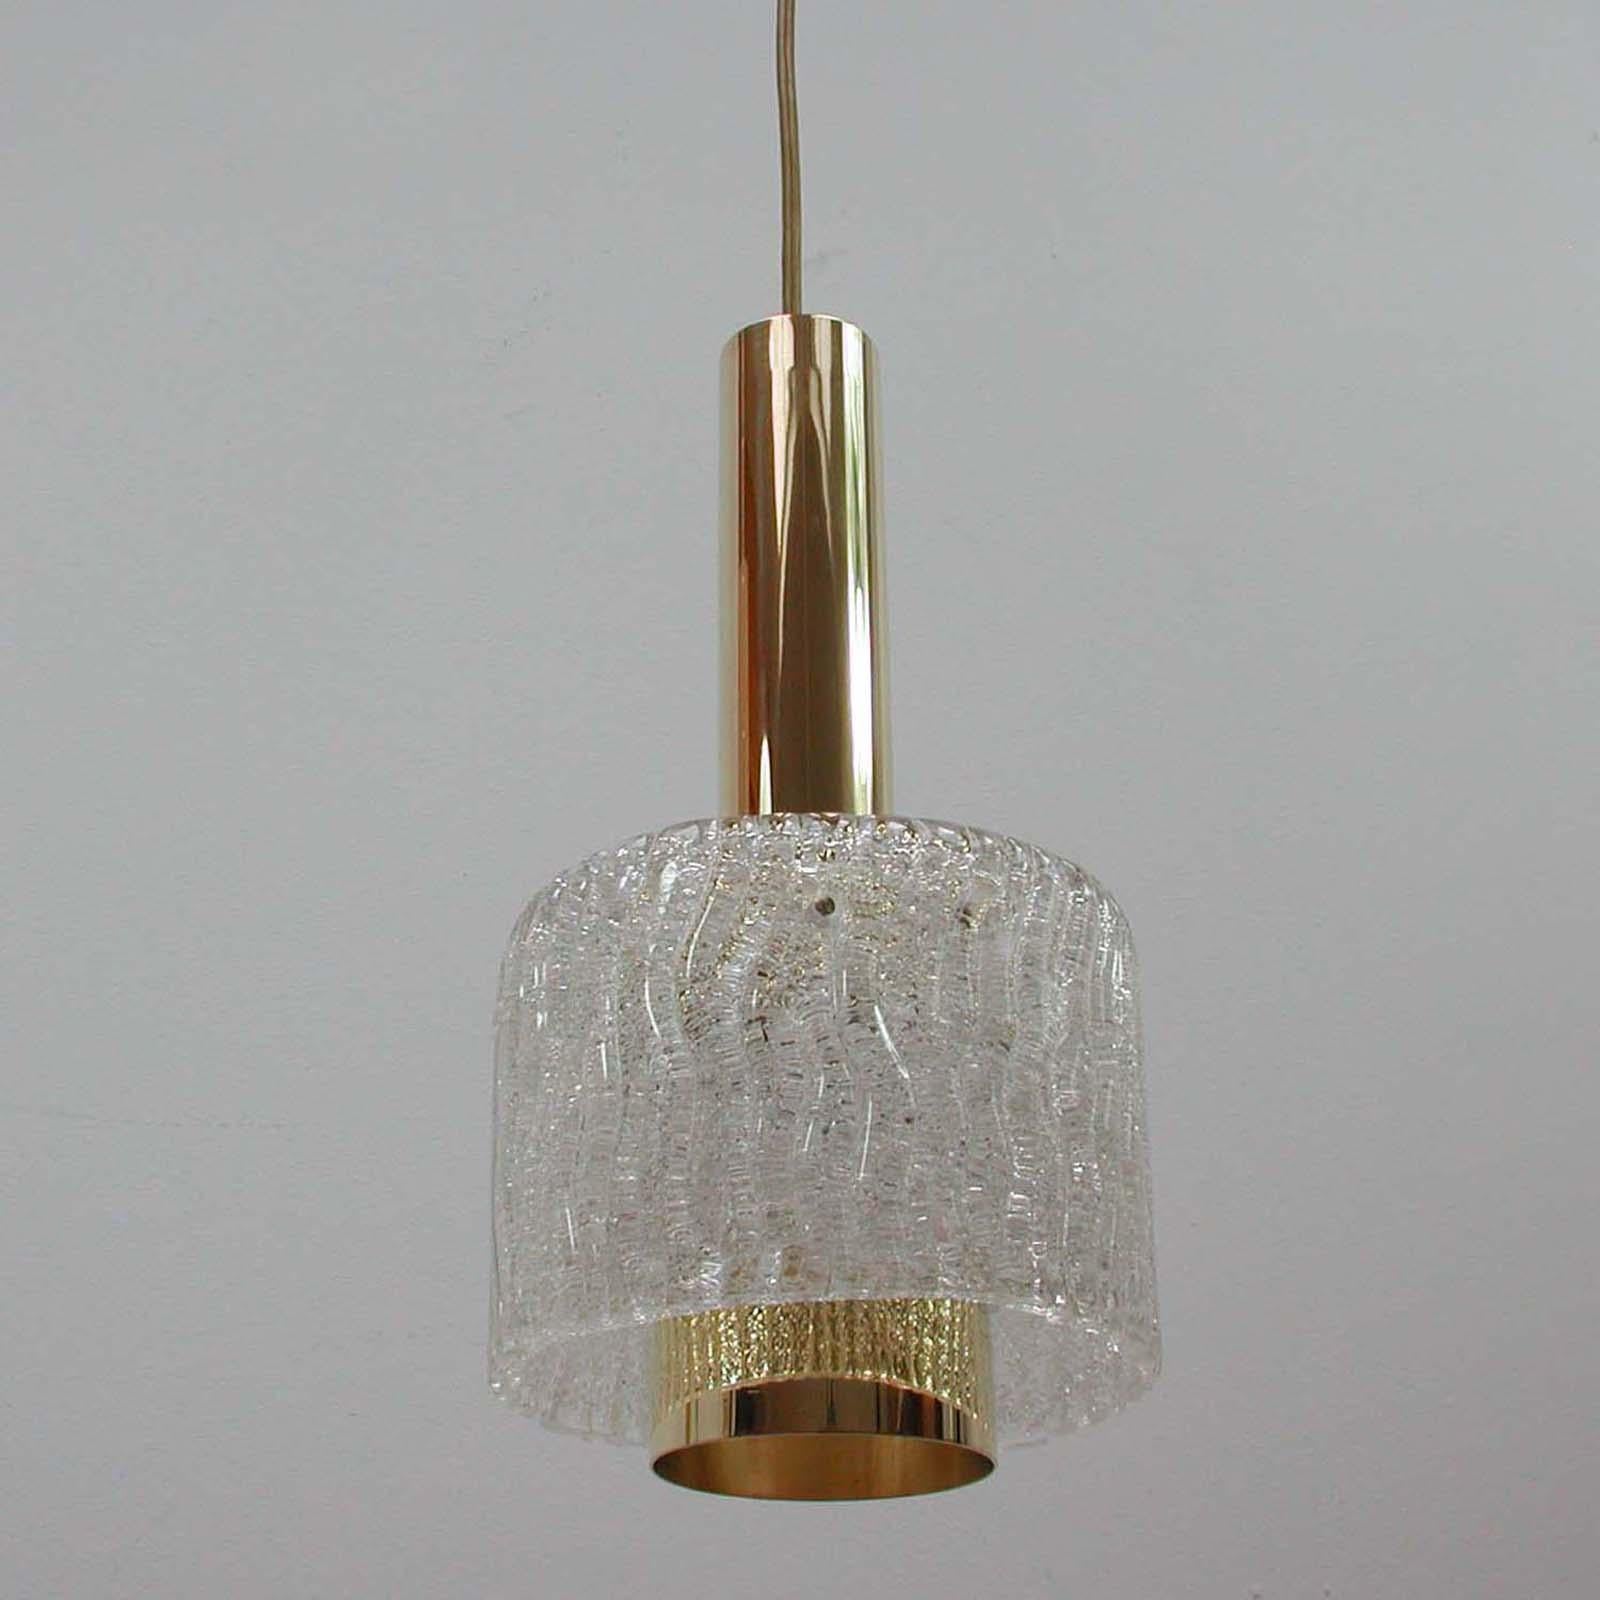 This beautiful midcentury pendant was designed and manufactured in Austria in the 1950s by JT Kalmar. It features a brass body and a textured glass lamp shade. The brass pieces have been professionally polished.

The pendant requires one E27 bulb.